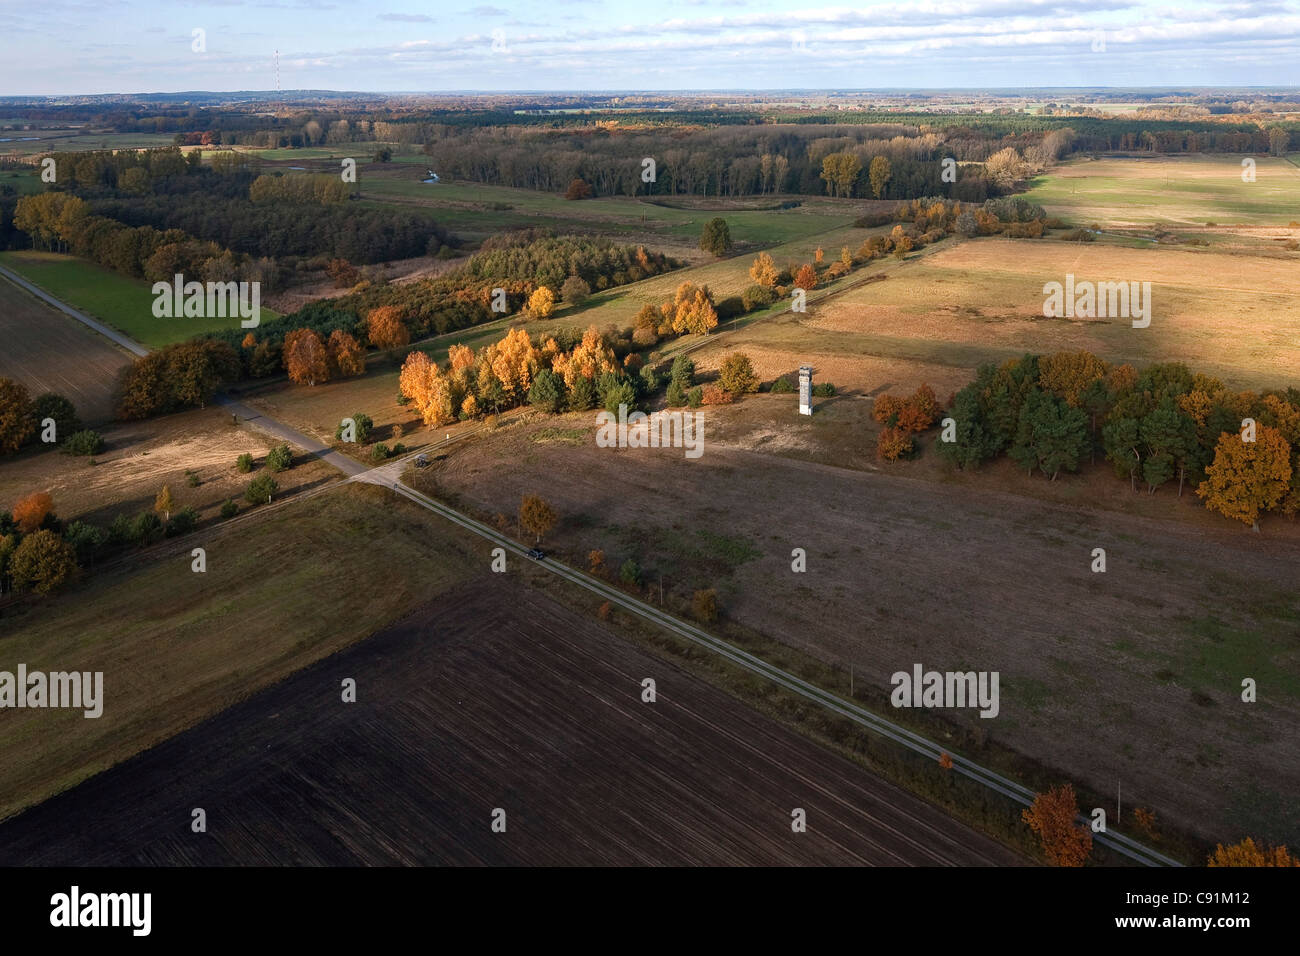 Aerial view of the former GDR border zone near Gartow in Wendland, Lower Saxony, Germany Stock Photo